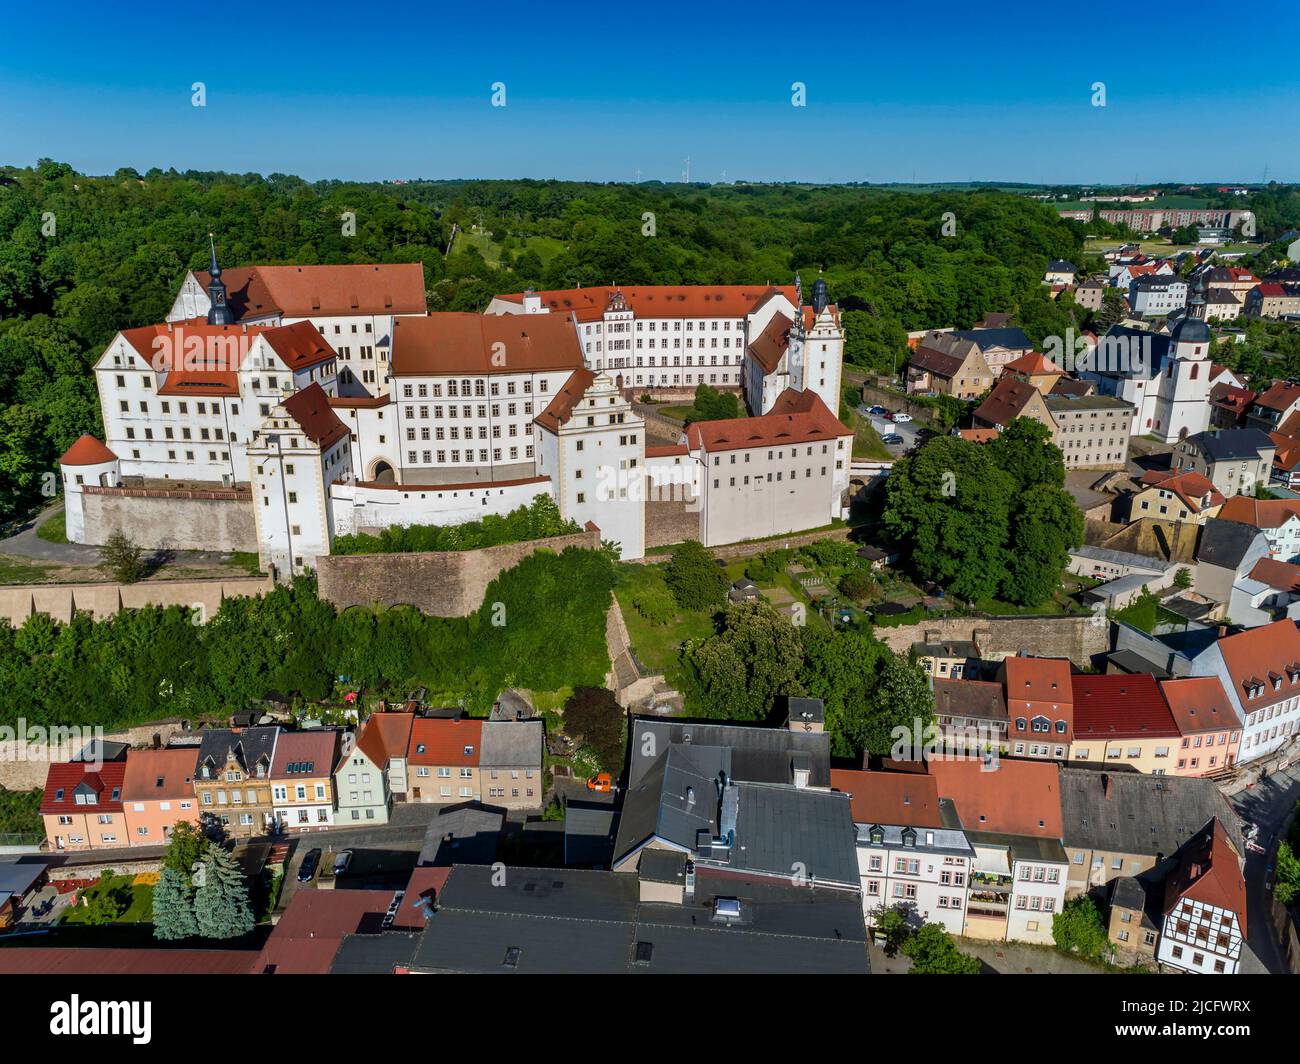 Colditz Castle is a Renaissance castle in Colditz in Central Saxony and gained international fame through its use as a prisoner of war camp for Allied officers during World War II. Stock Photo